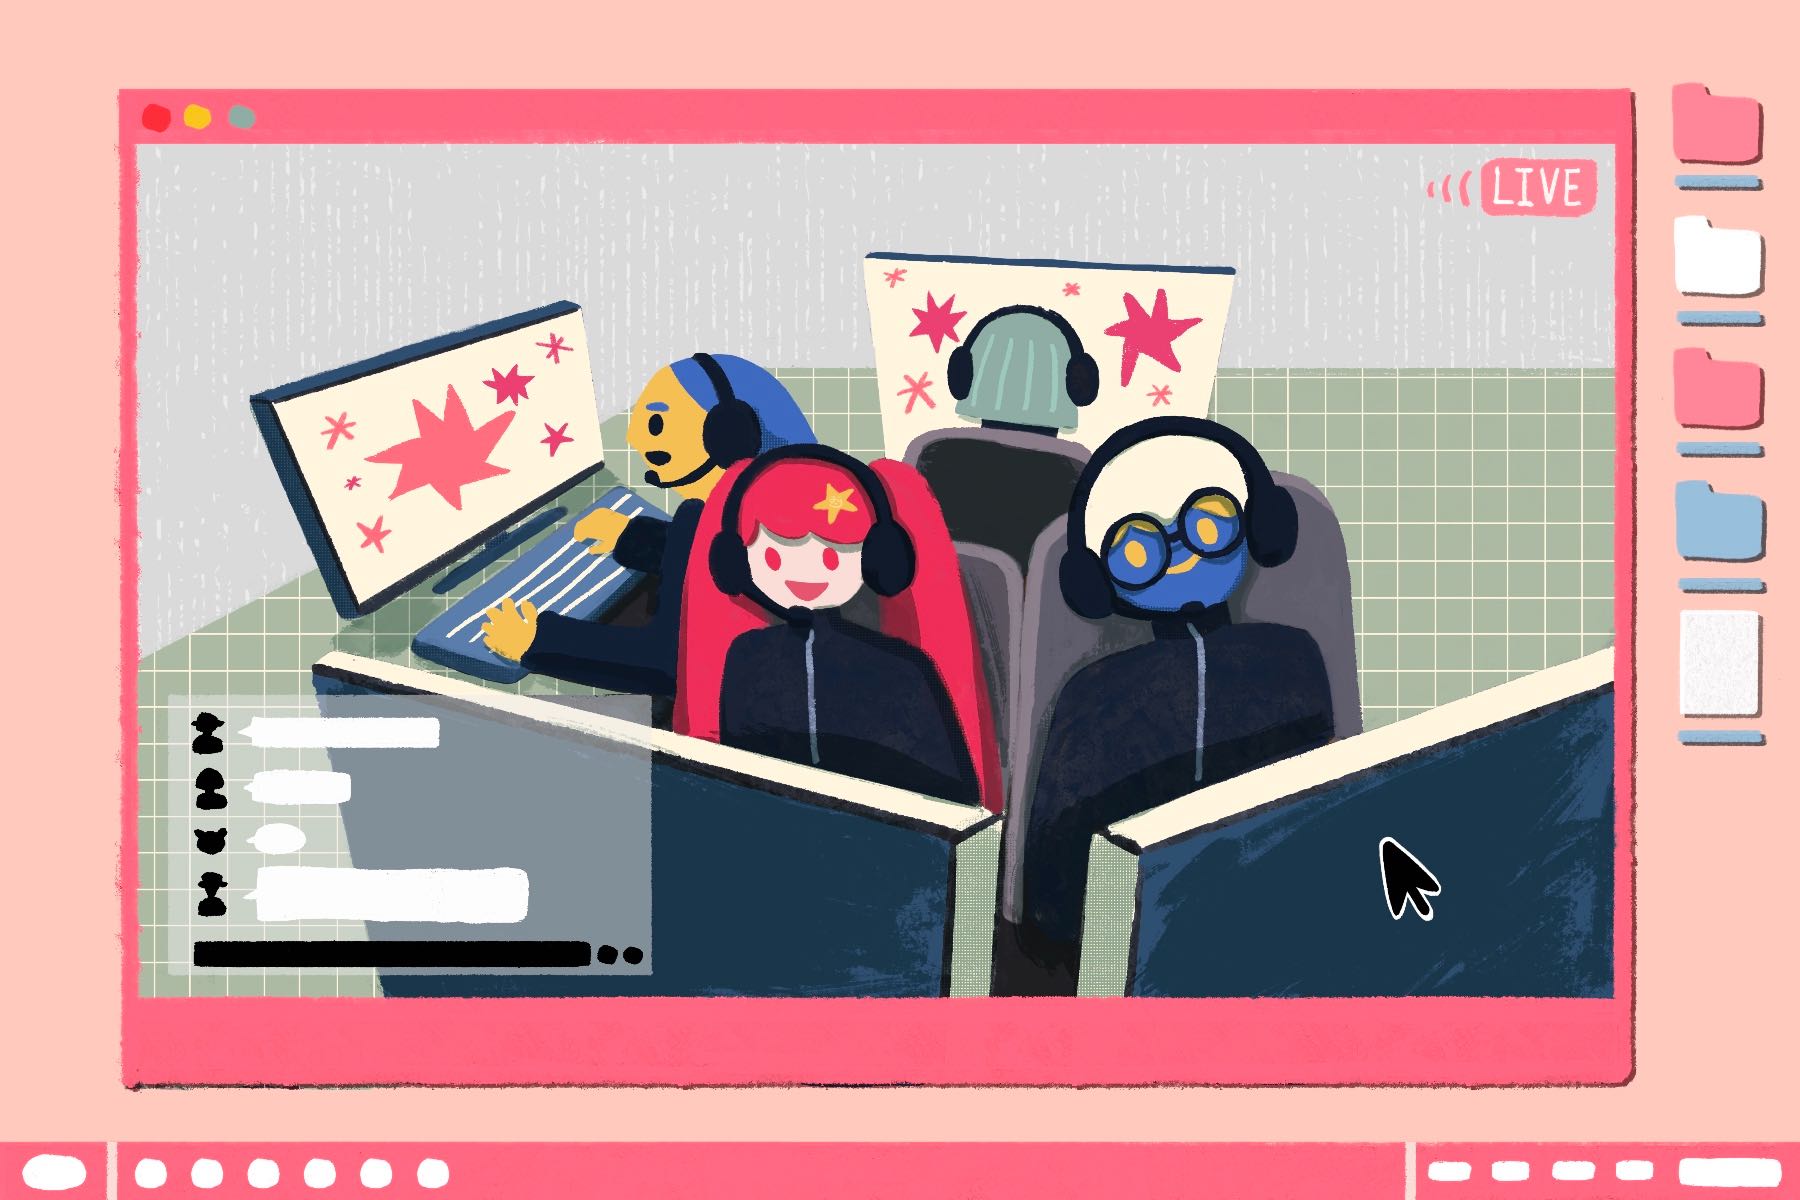 Illustration by Yao Jian of four people playing esports on large computer screens